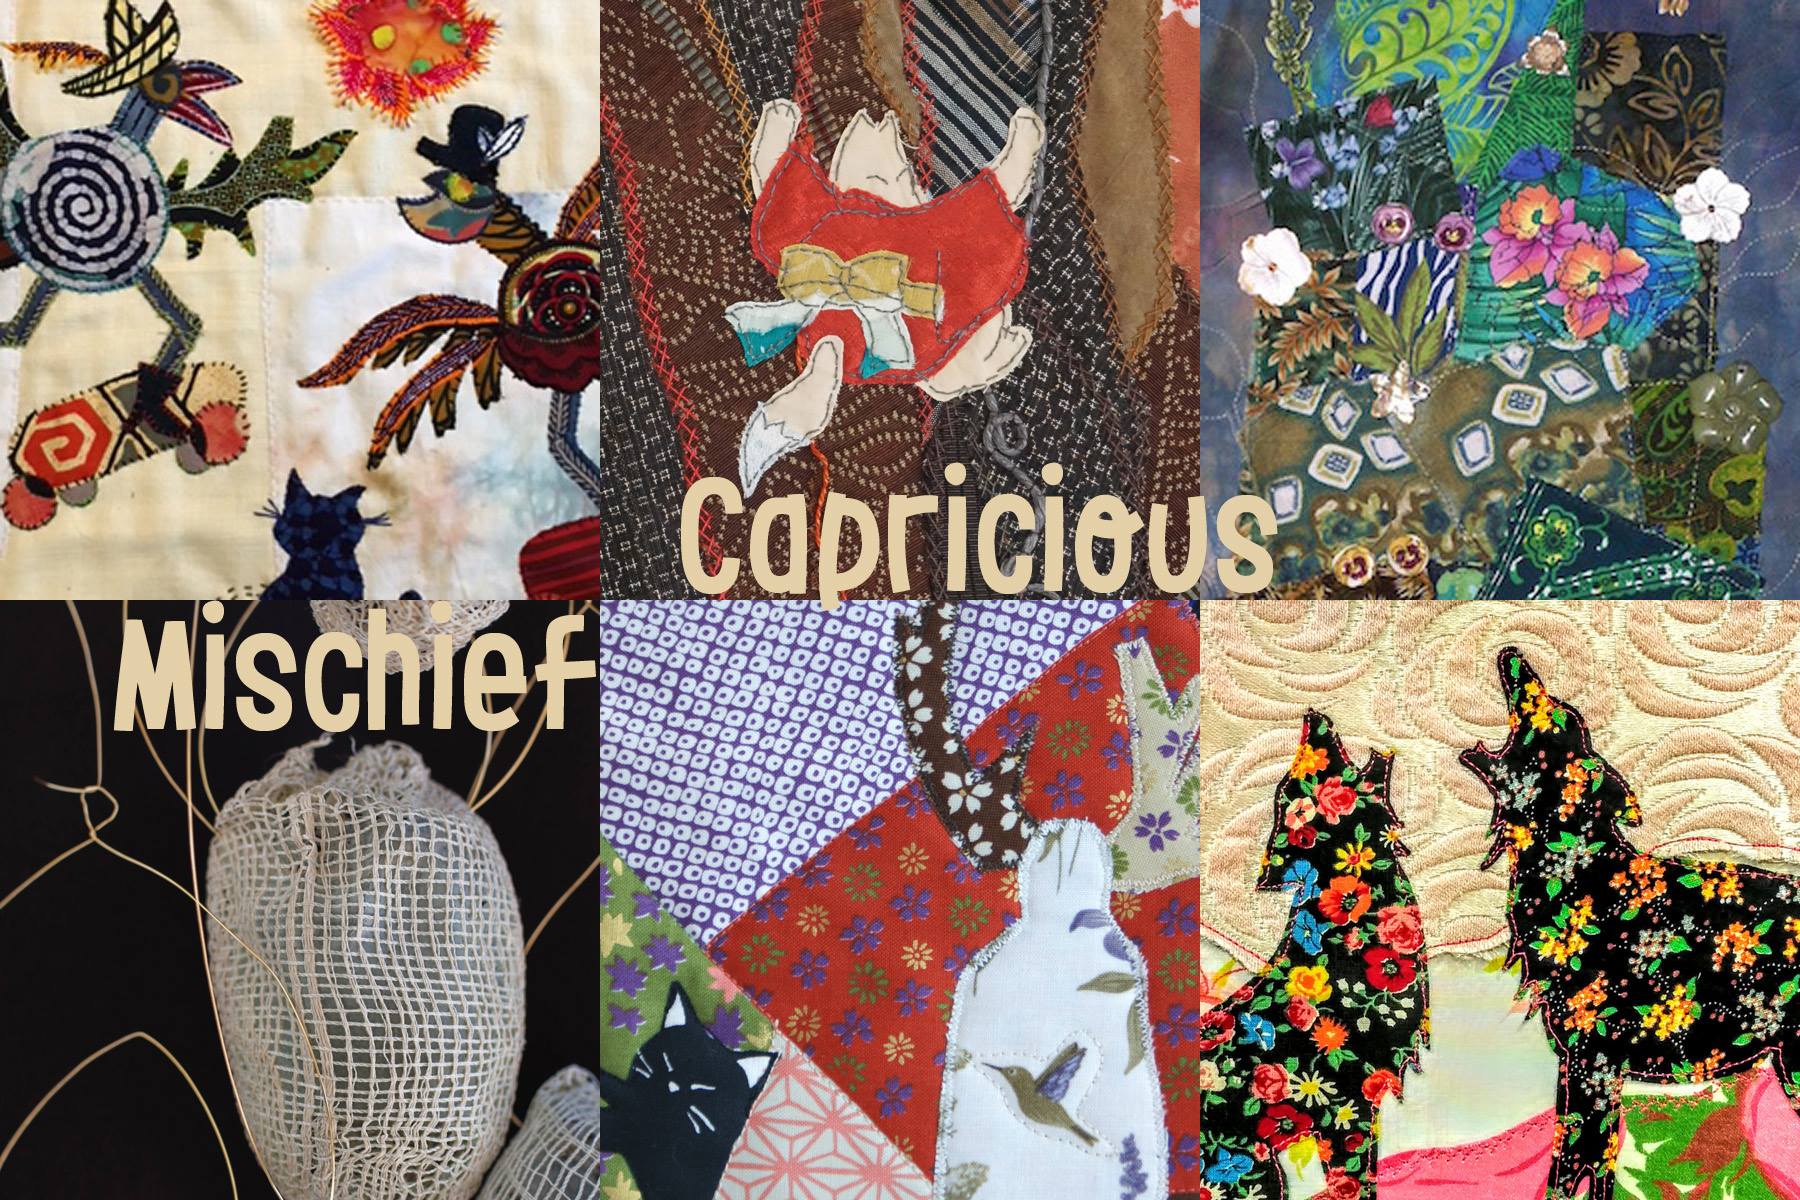 Capricious Mischief-Hosted by Chaffey Community Museum of Art